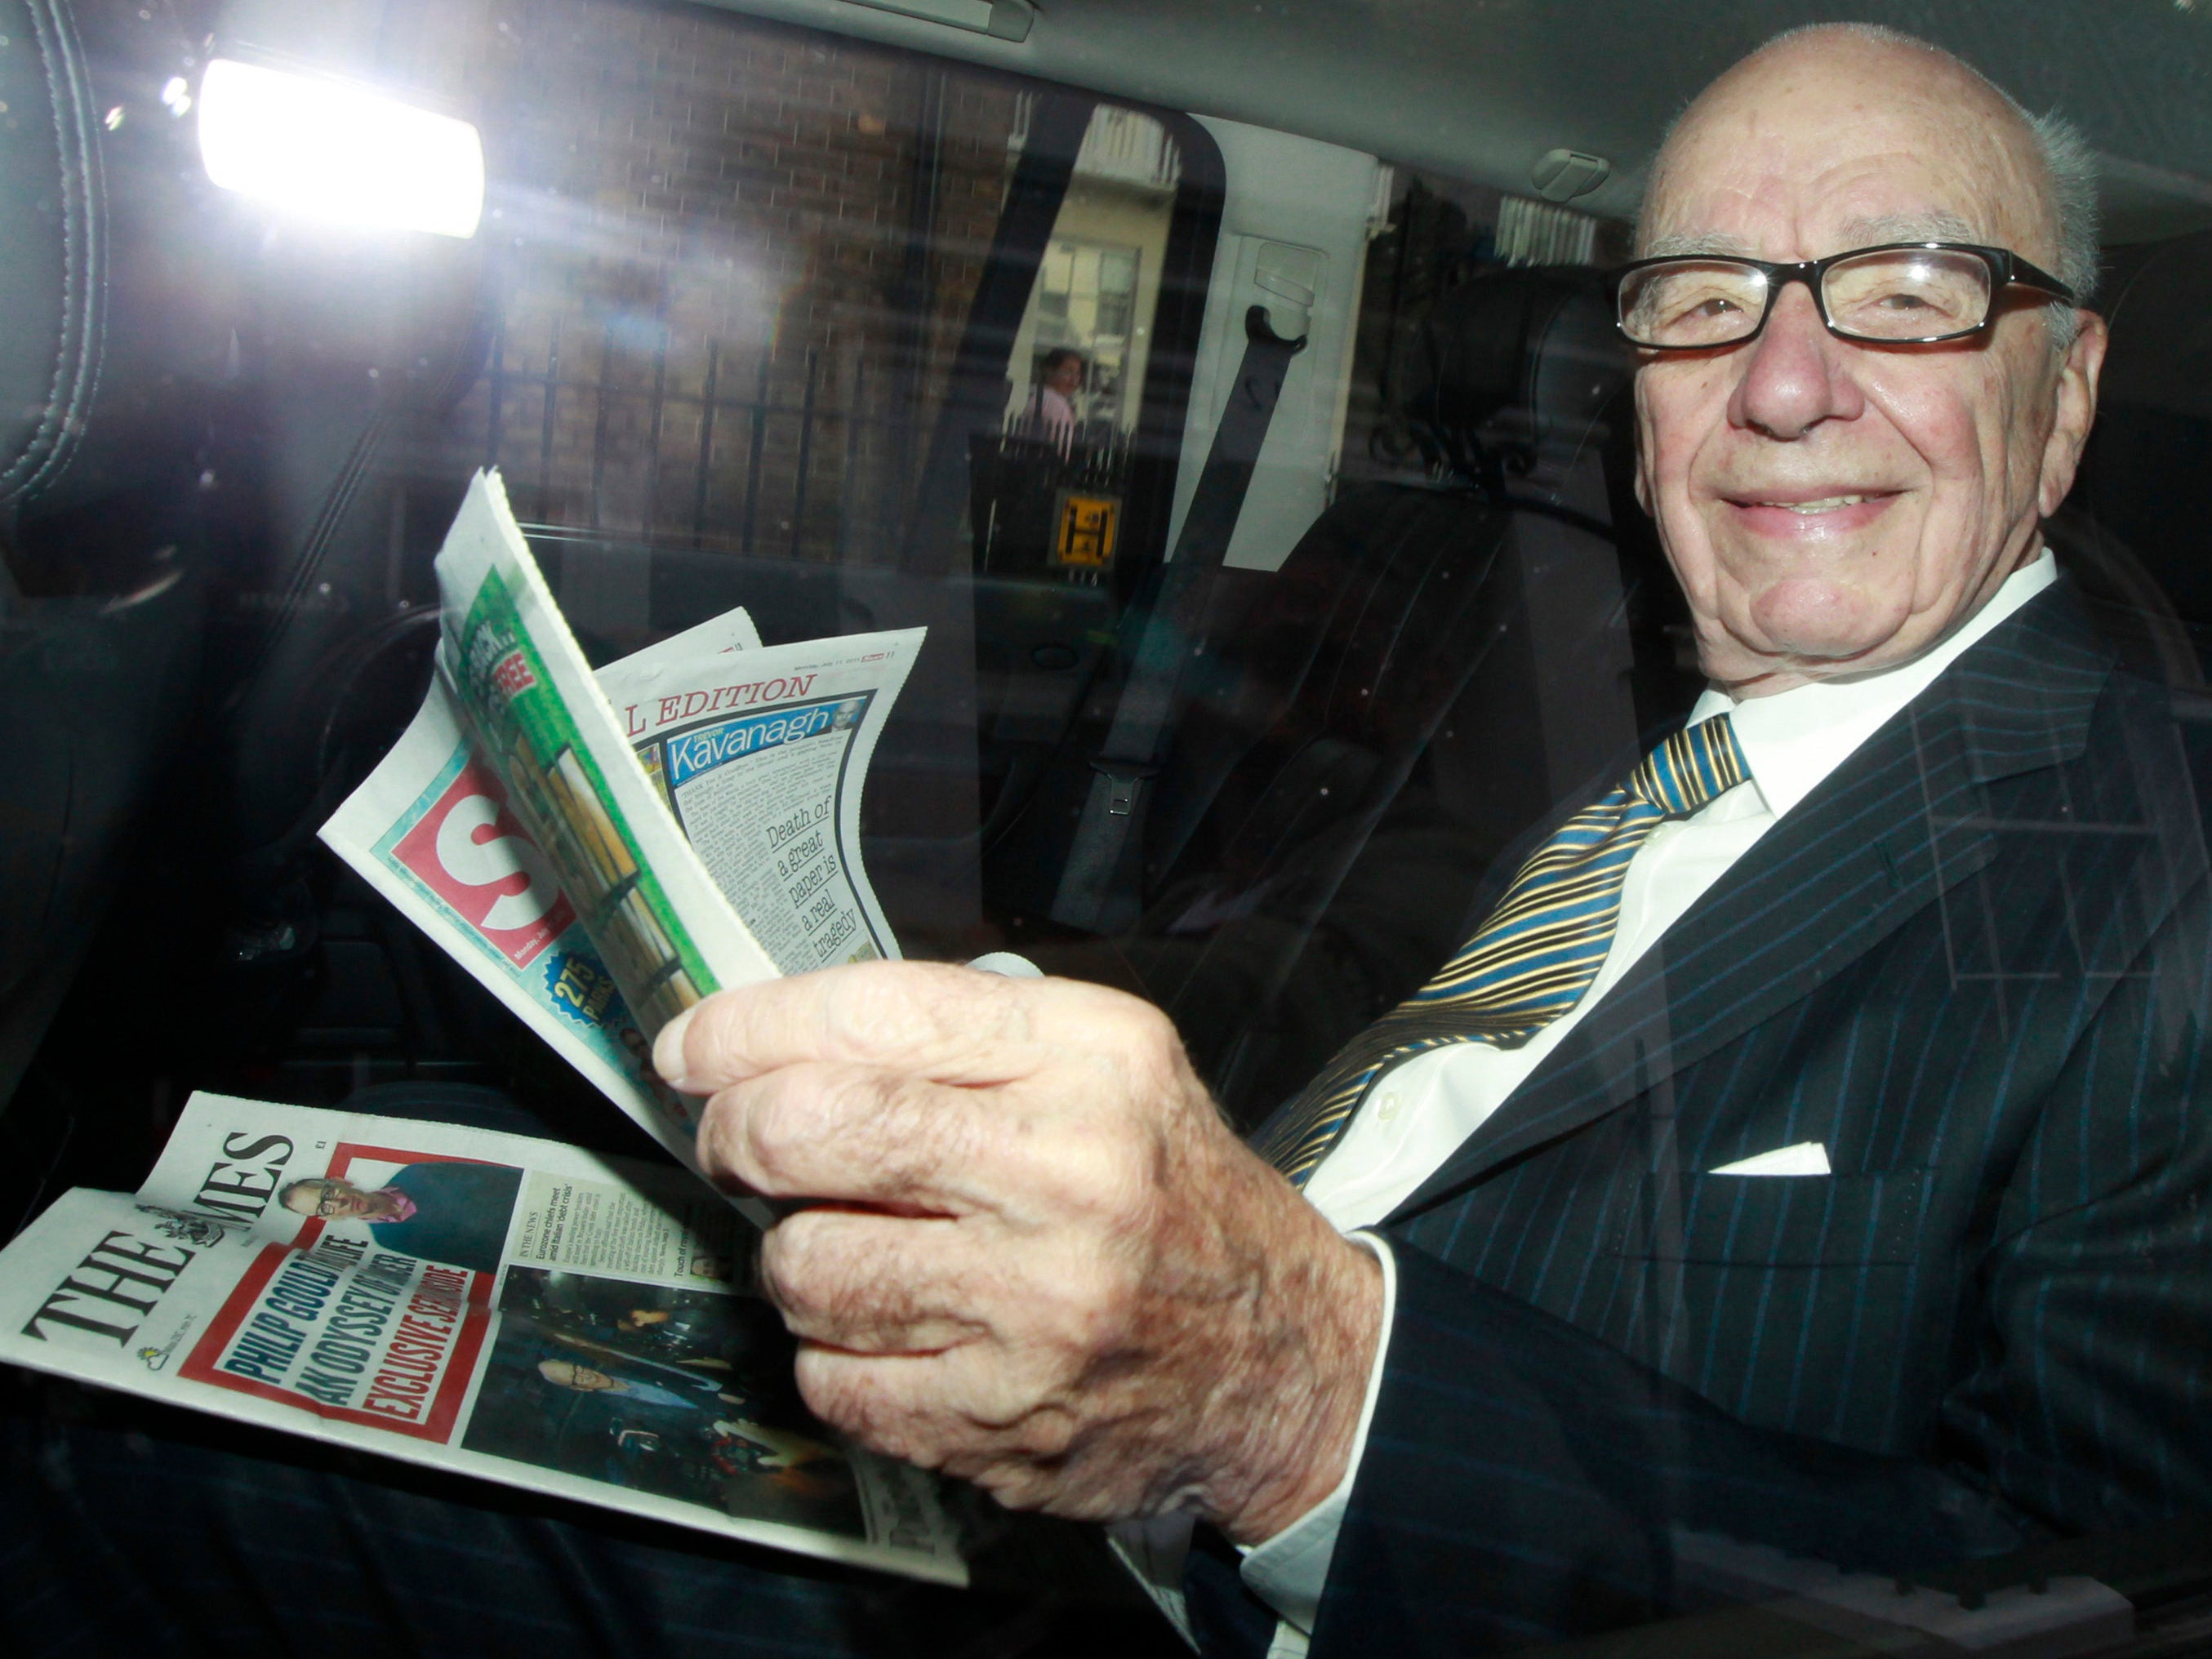 News Corp, part-owned by Rupert Murdoch, remains top for prime minister meetings in the UK